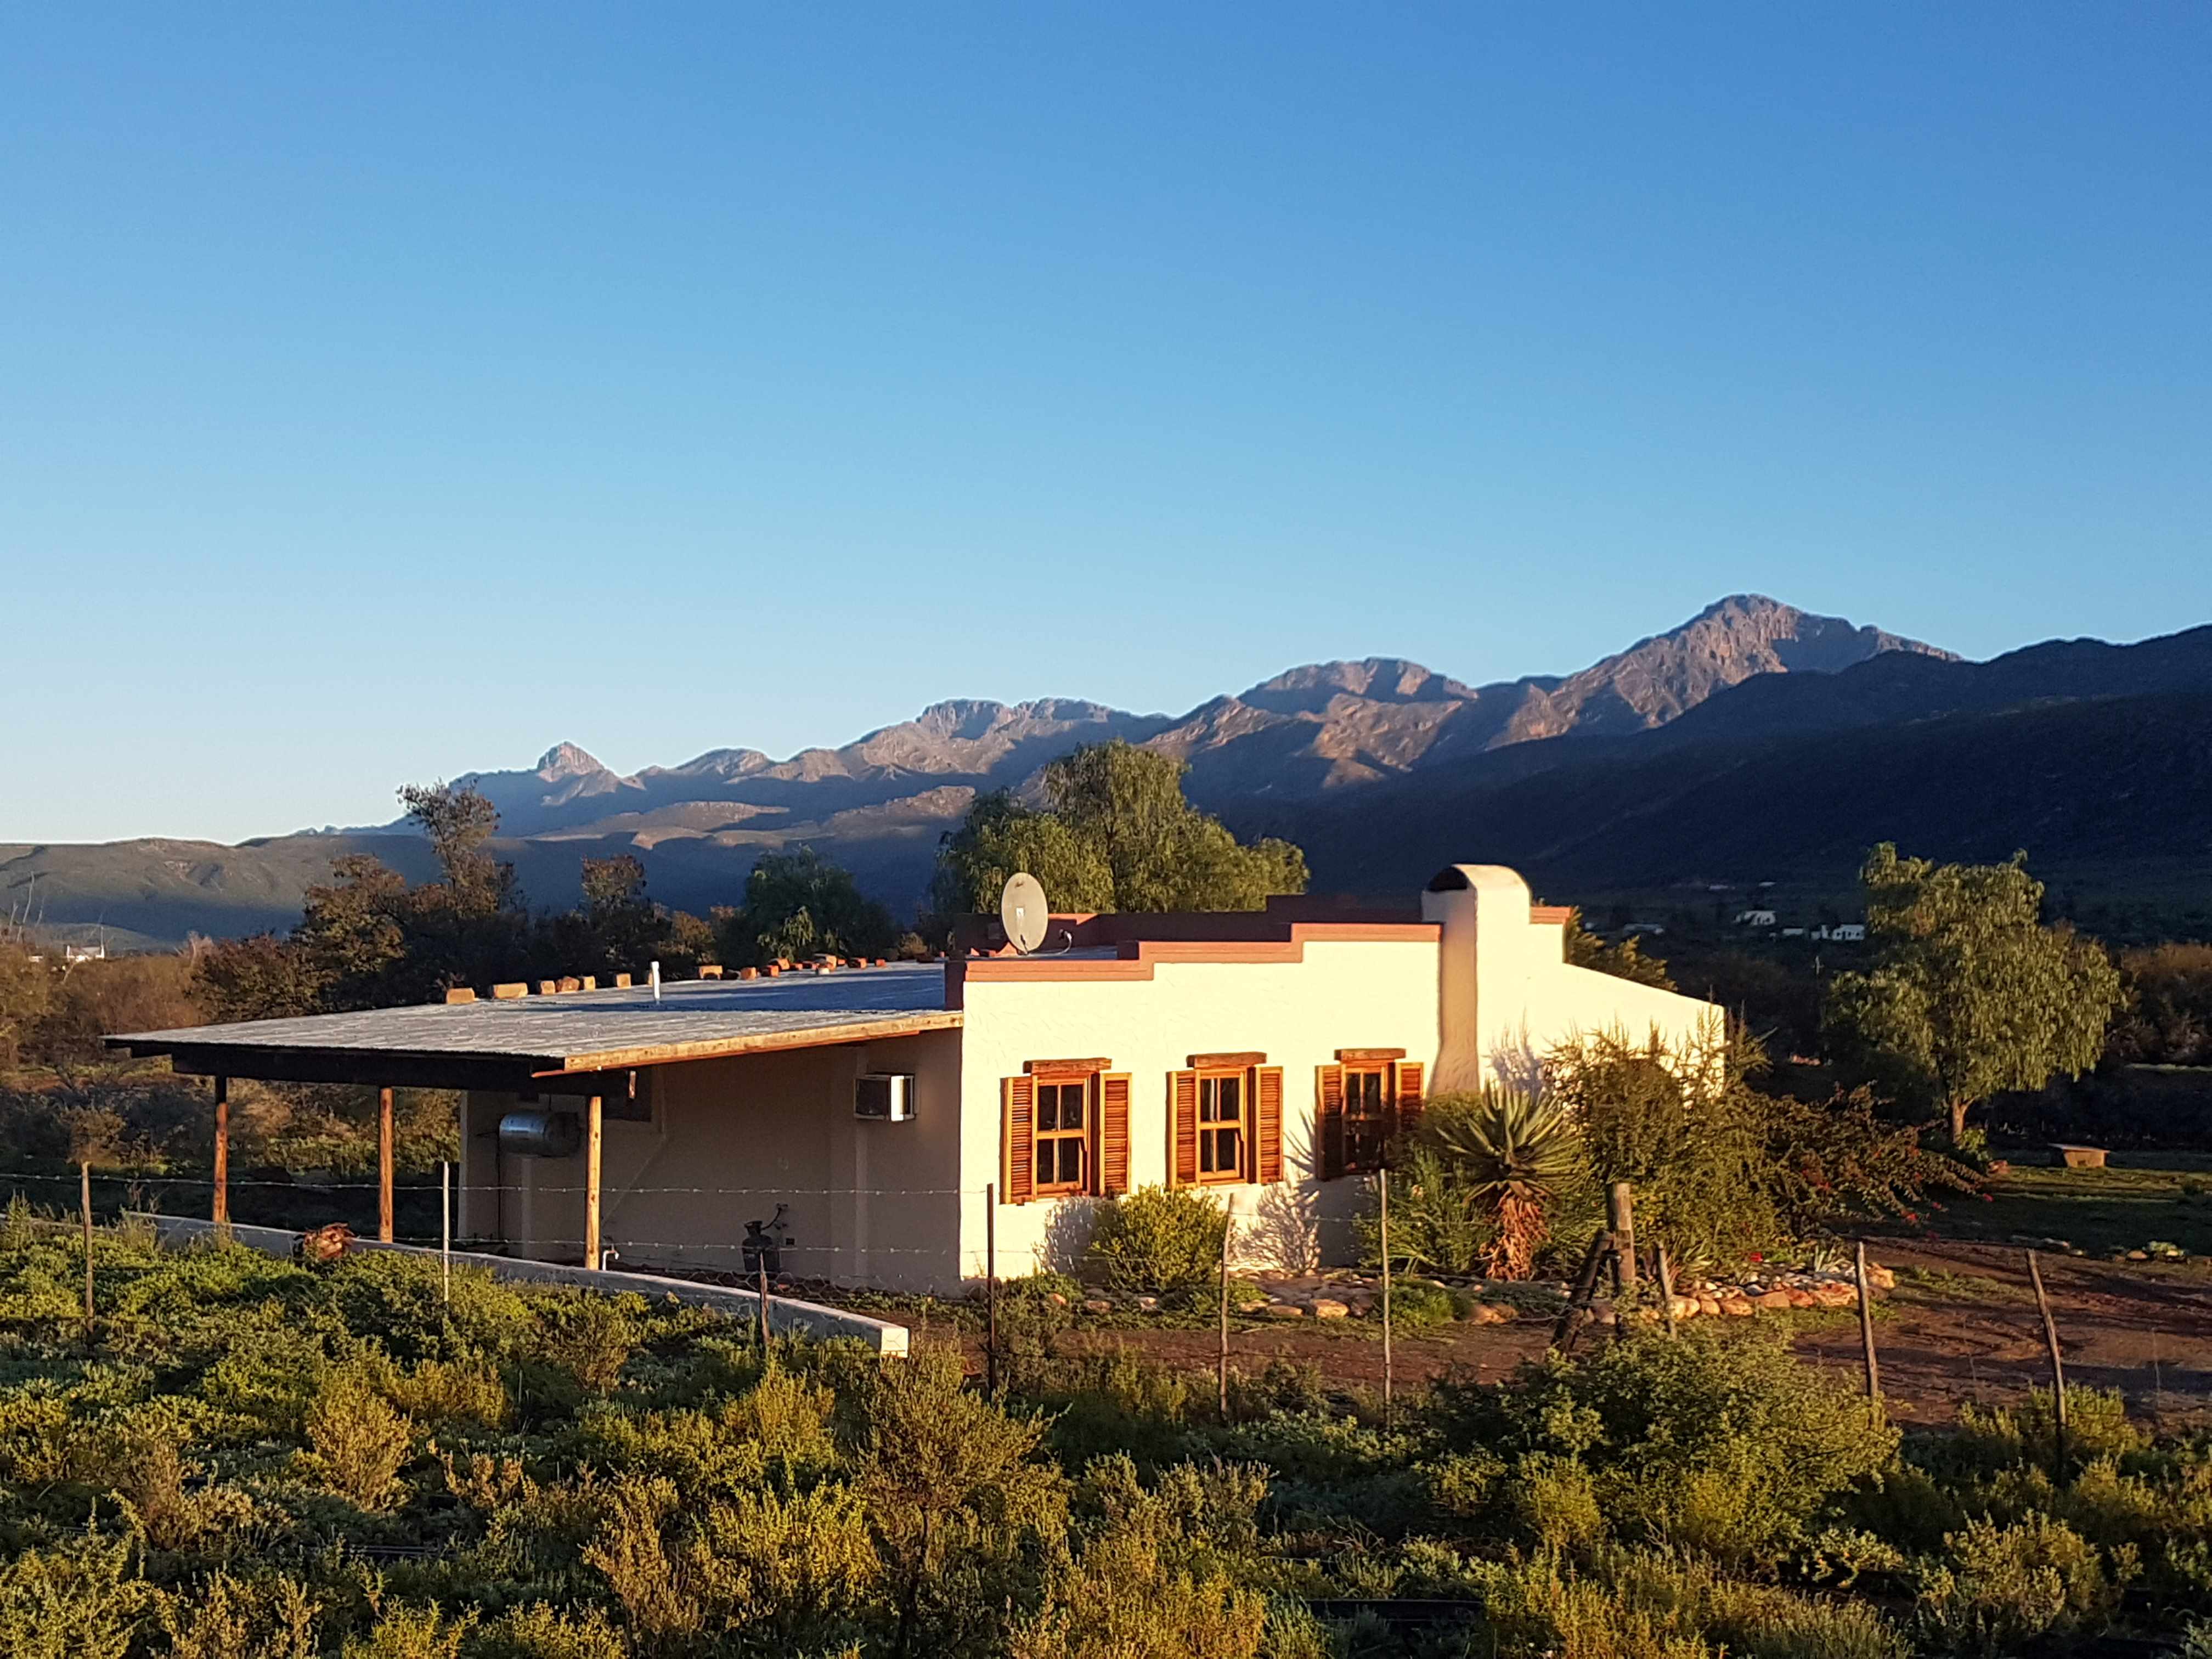 Klein Karoo Valley Guest Farm Cottage at the foothills of the Swartberg Mountains